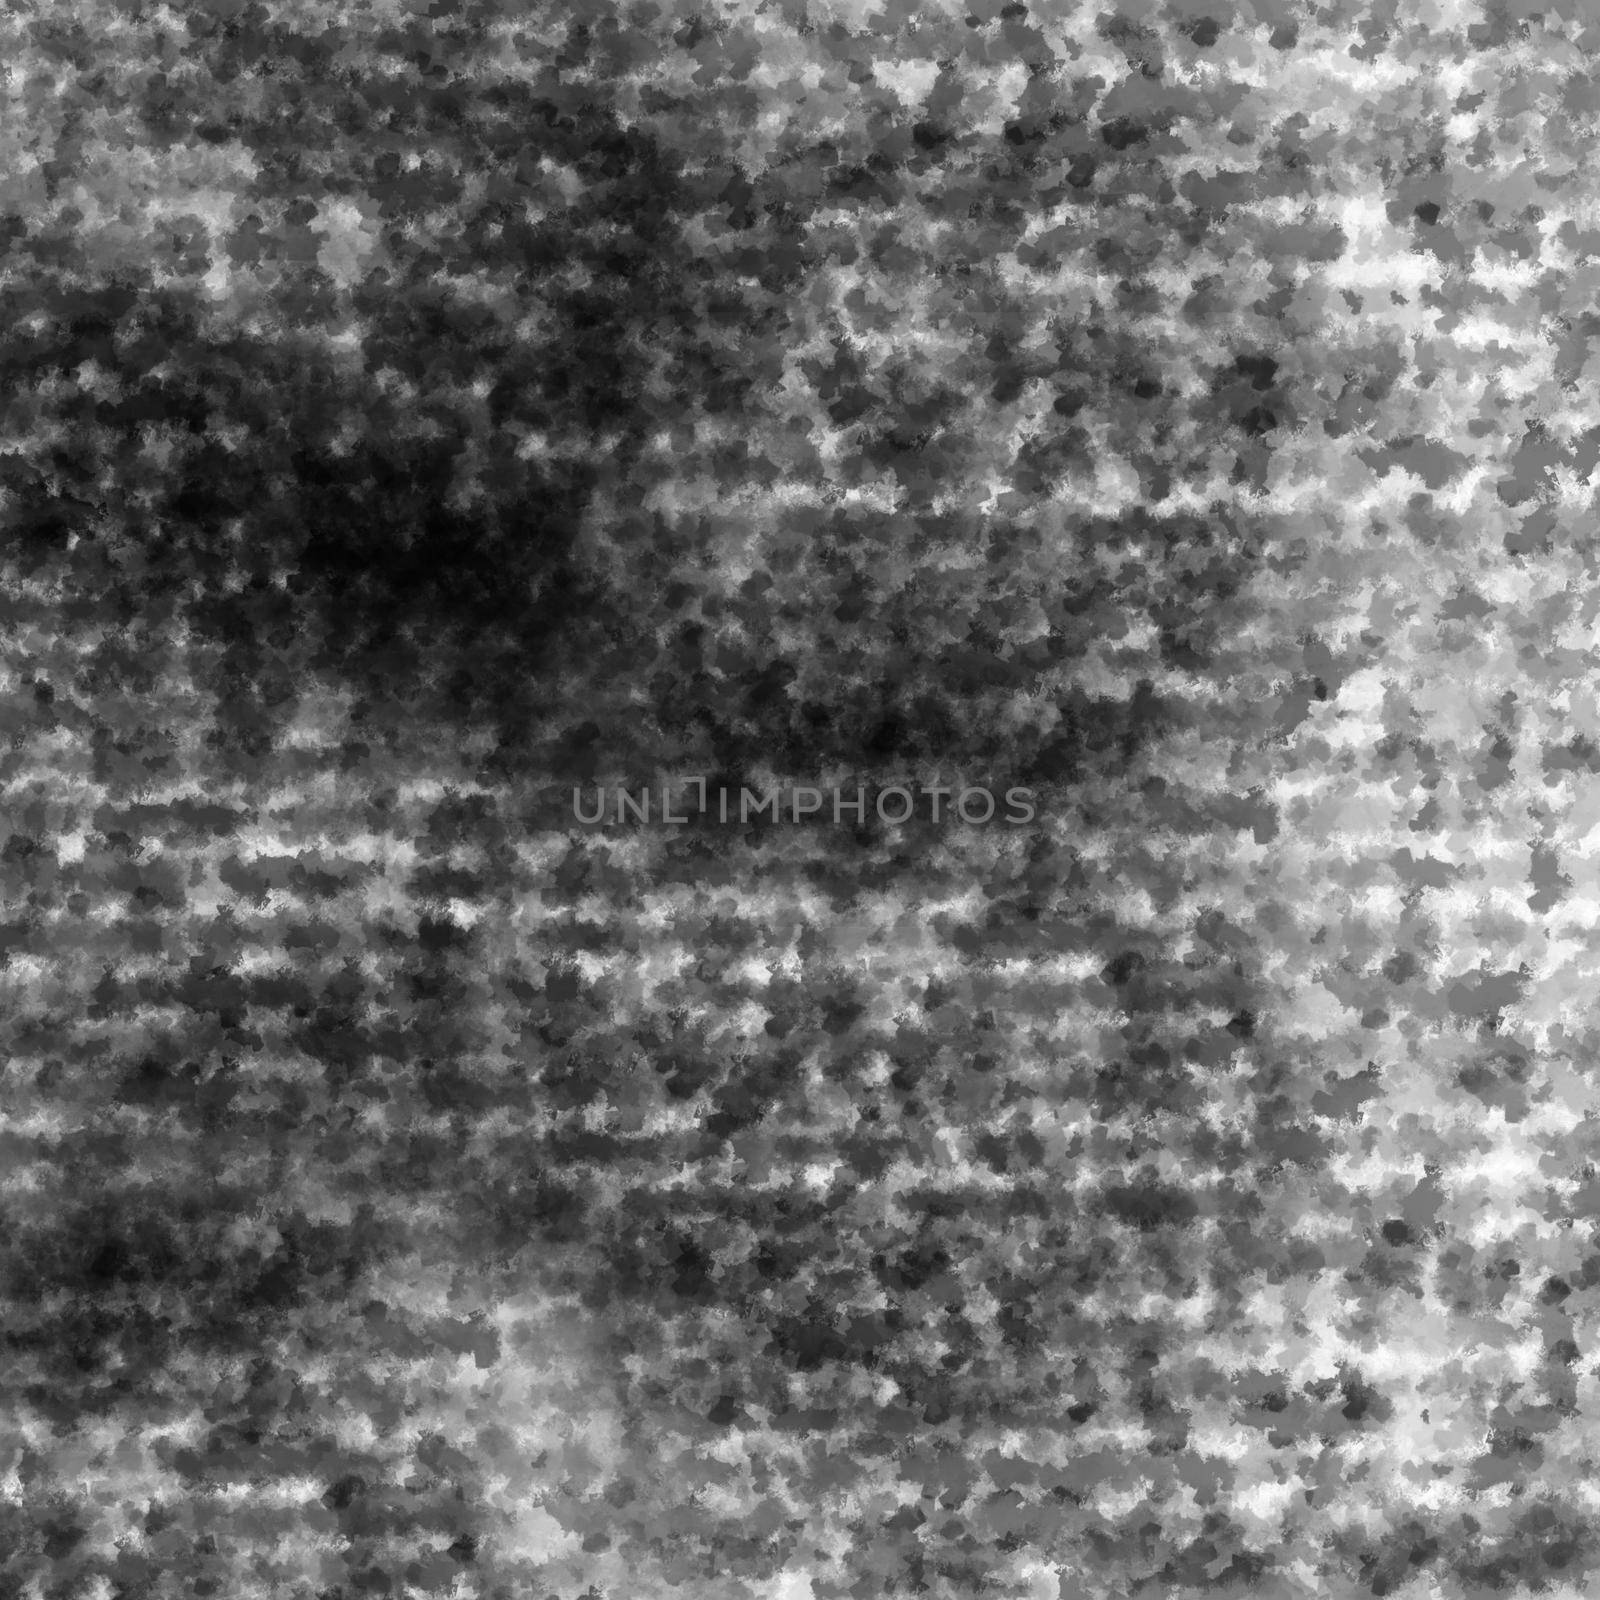 Unfocused black spots on the paper surface.Texture or background